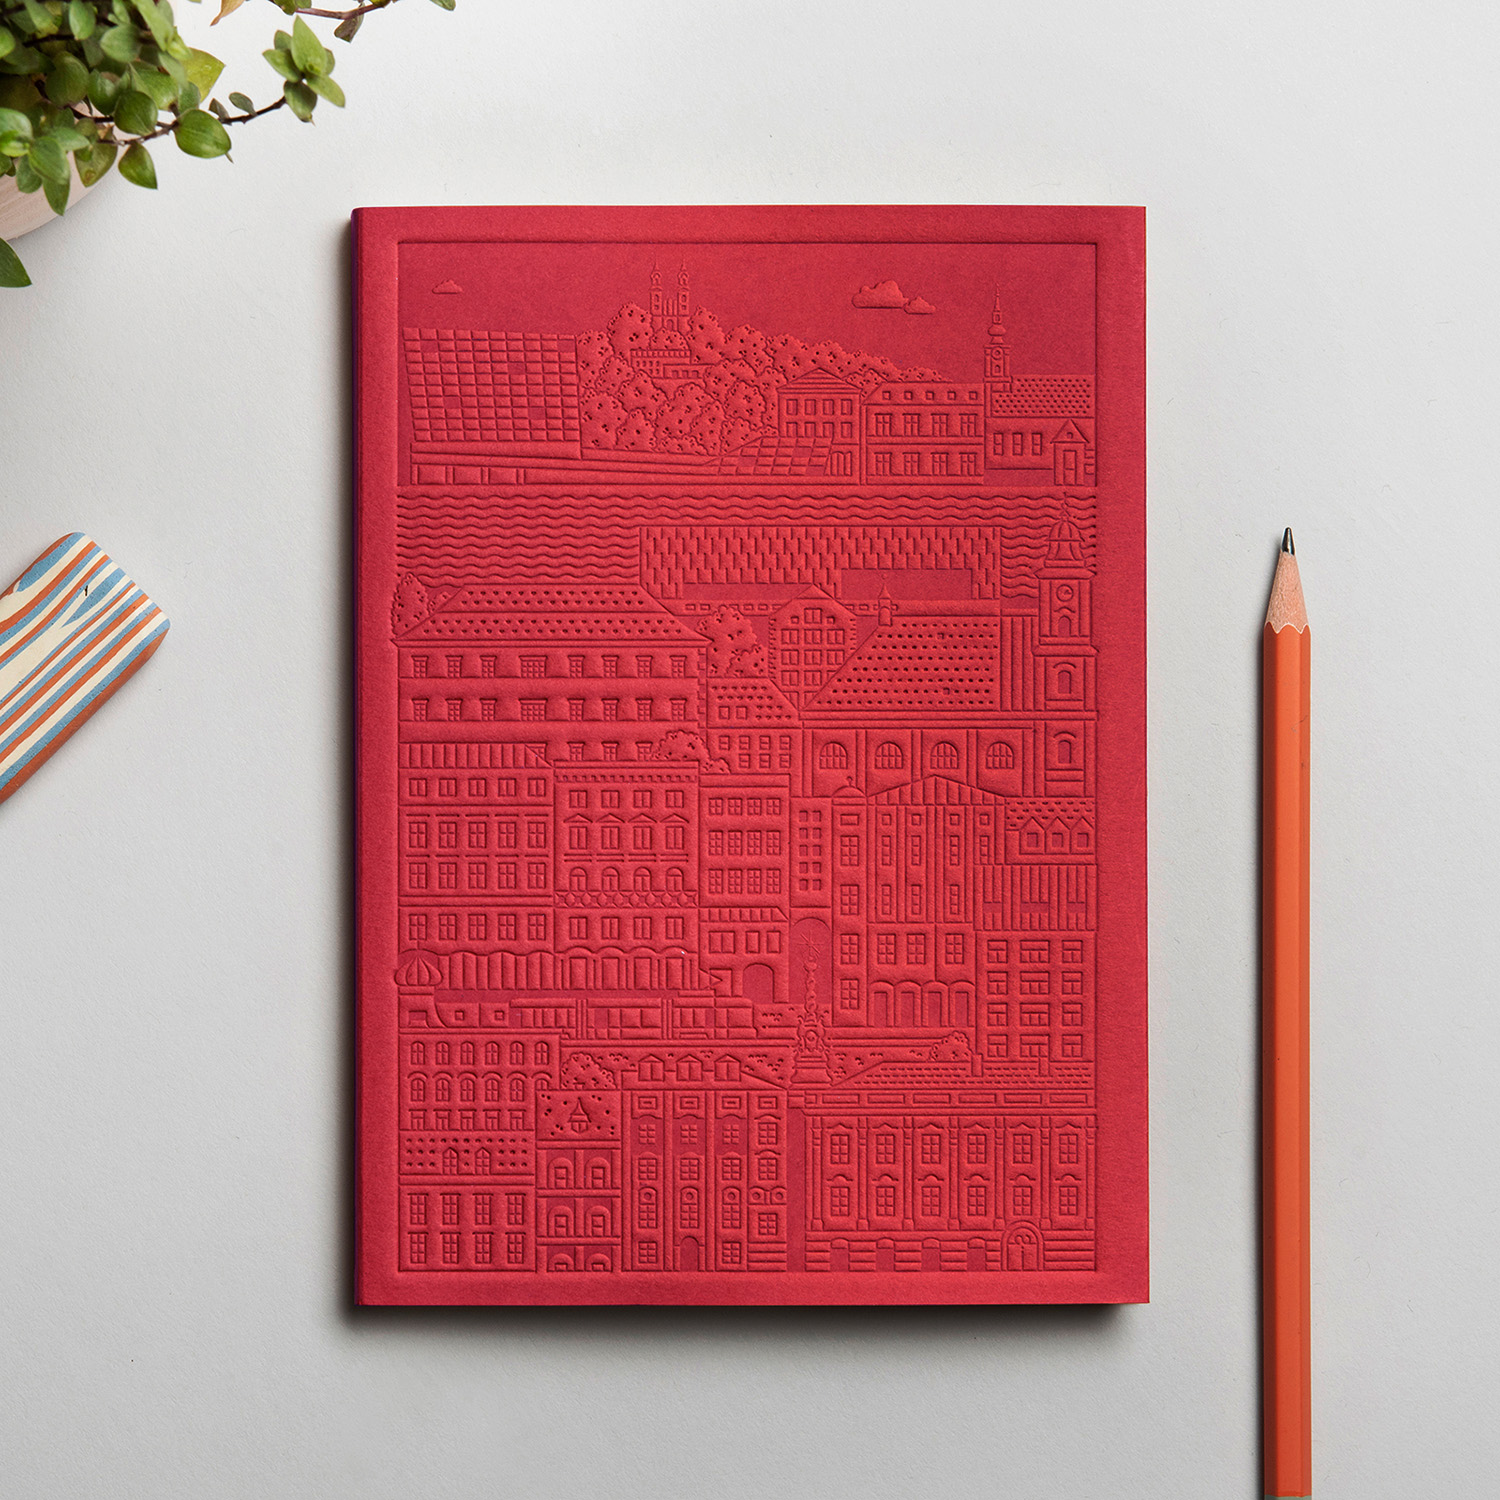 Linz Notebook by The City Works